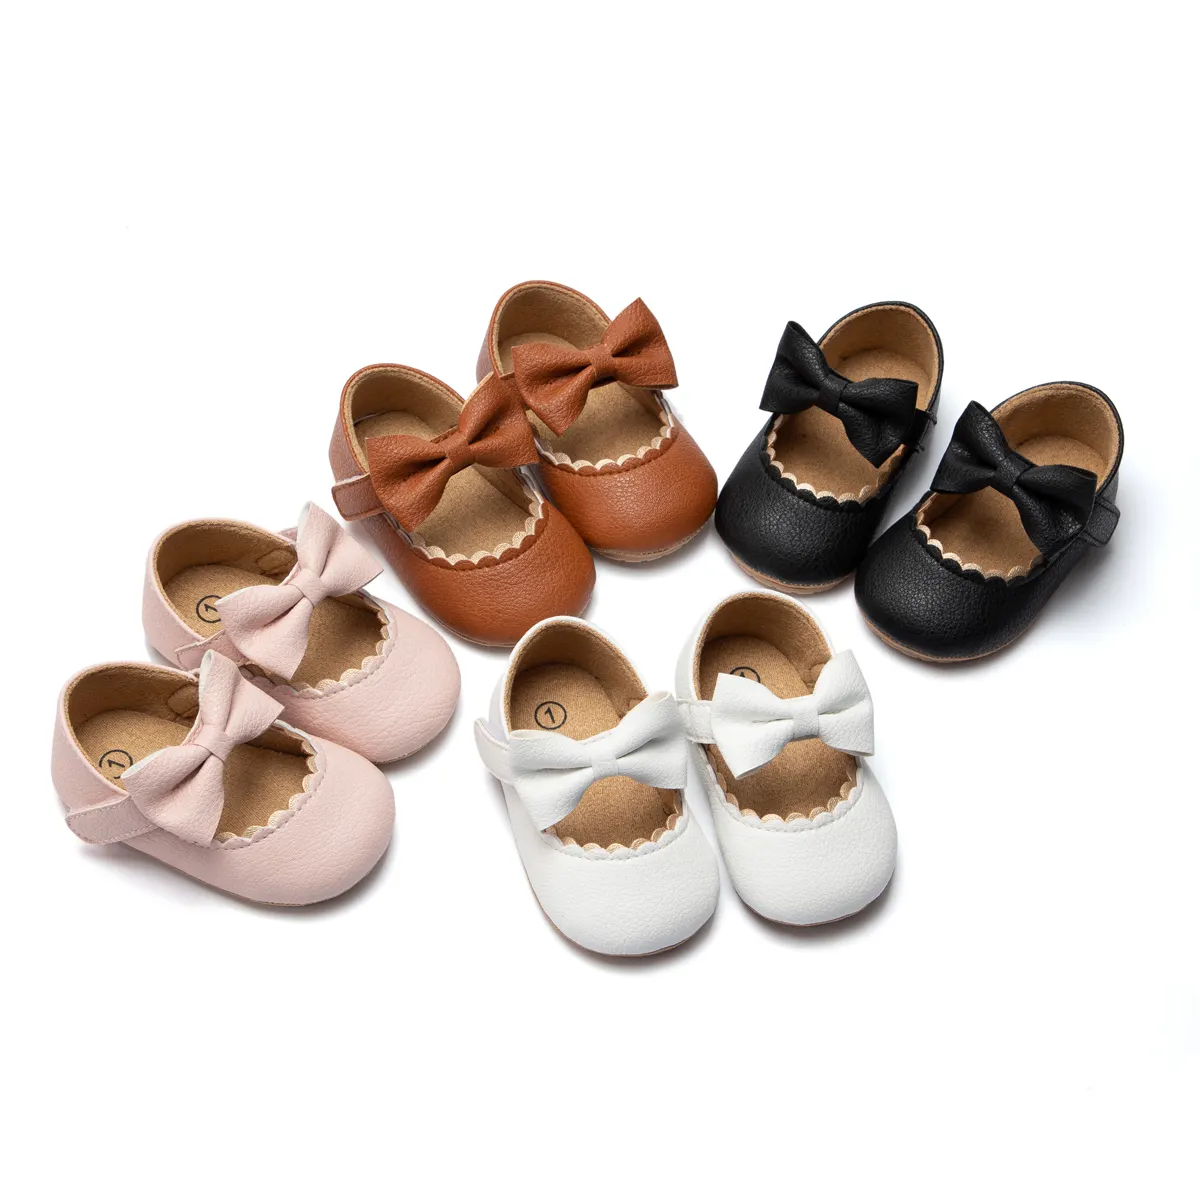 Factory Direct Princess Bowknot Wedding Newborn Dress Shoes Mary Jane Flat PU Leather Rubber Soft Sole Baby Girl Shoes